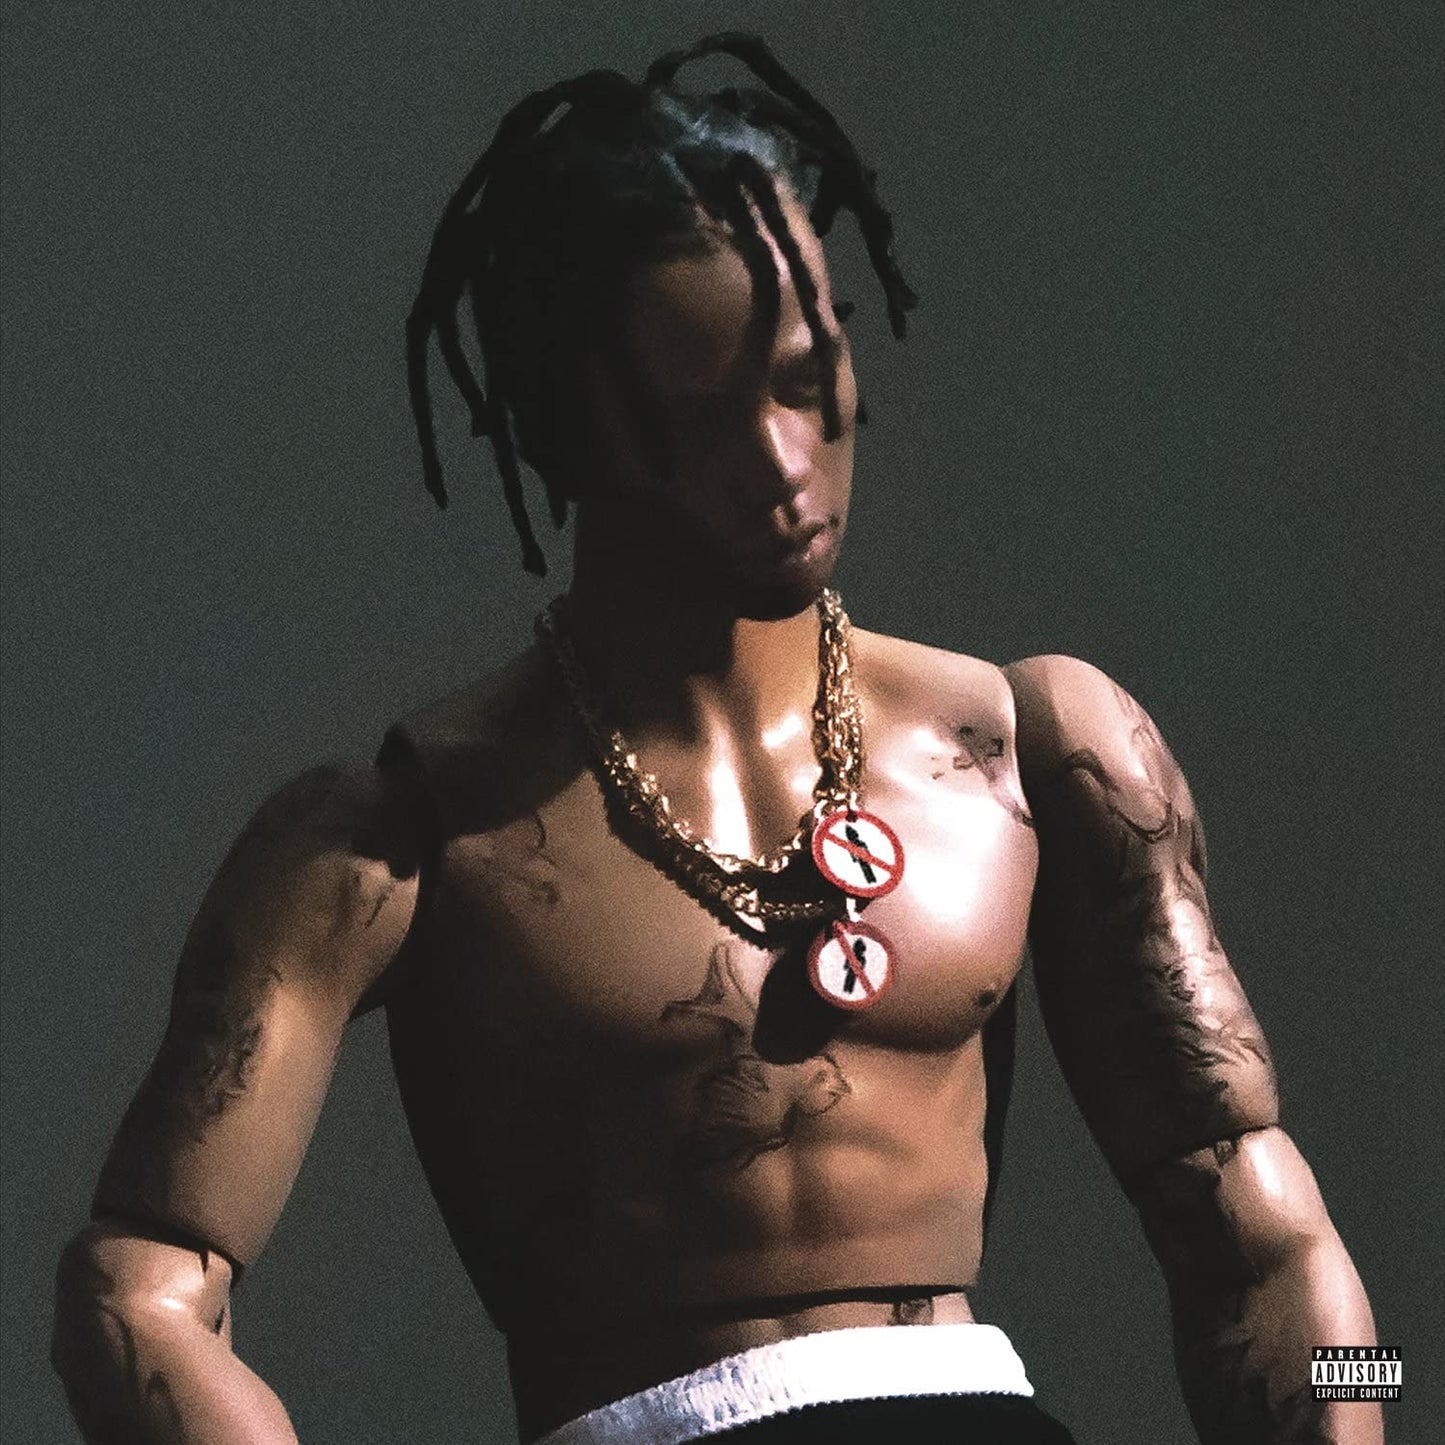 2015 album from  Texan rapper/songwriter Travis Scott on Vinyl (producer & co-writer of Rihanna’s "Bitch Better Have My *"). Guests include Kanye West, Justin Bieber, Future, Weeknd, 2 Chainz, Juicy J & Schoolboy Q